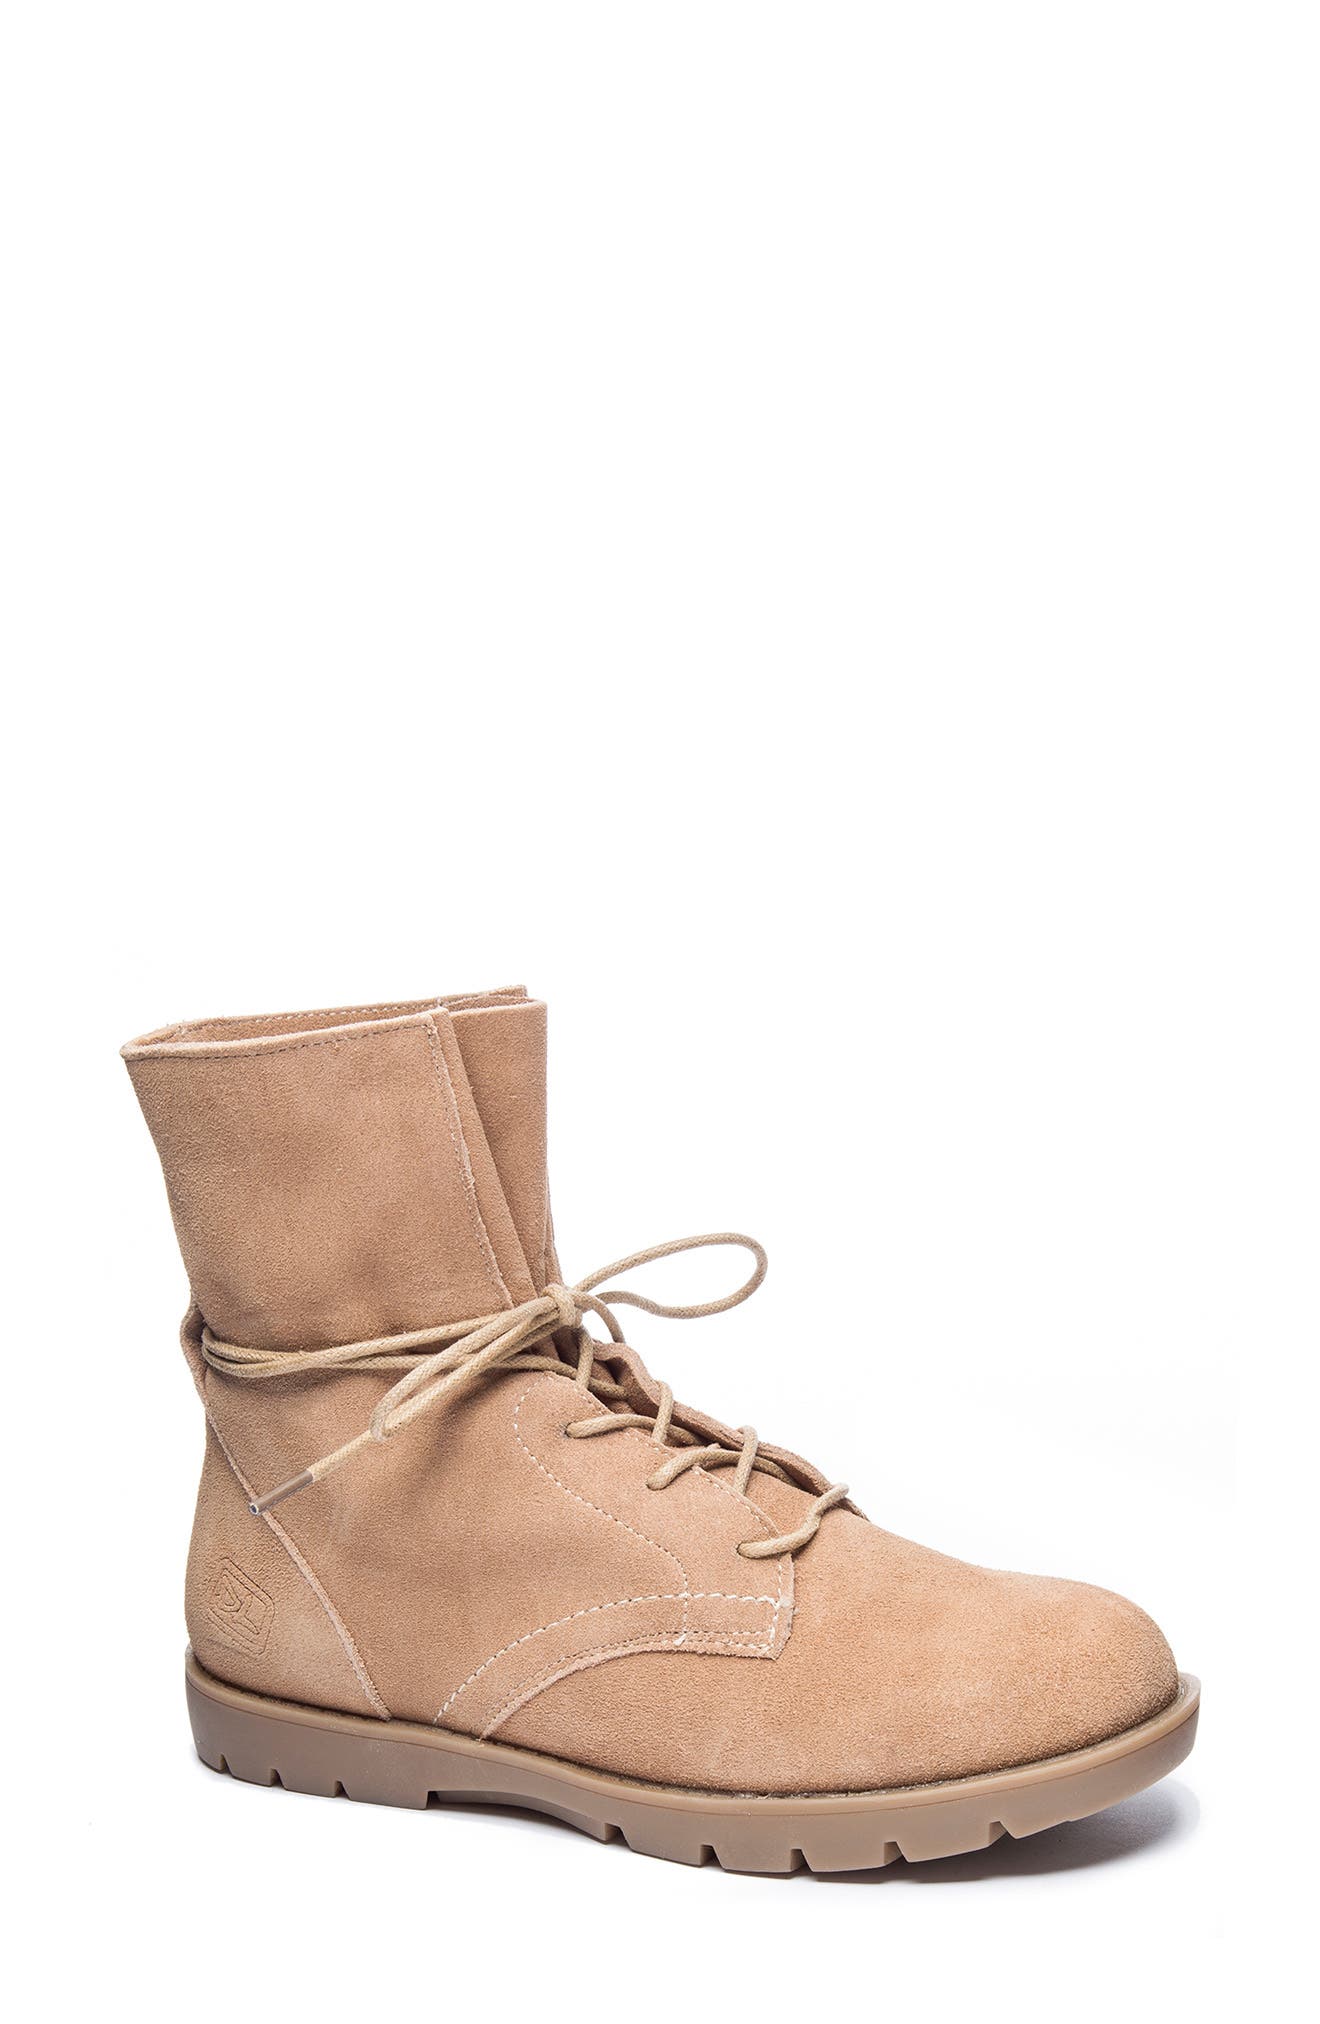 Sale: Women's Dirty Laundry Boots 